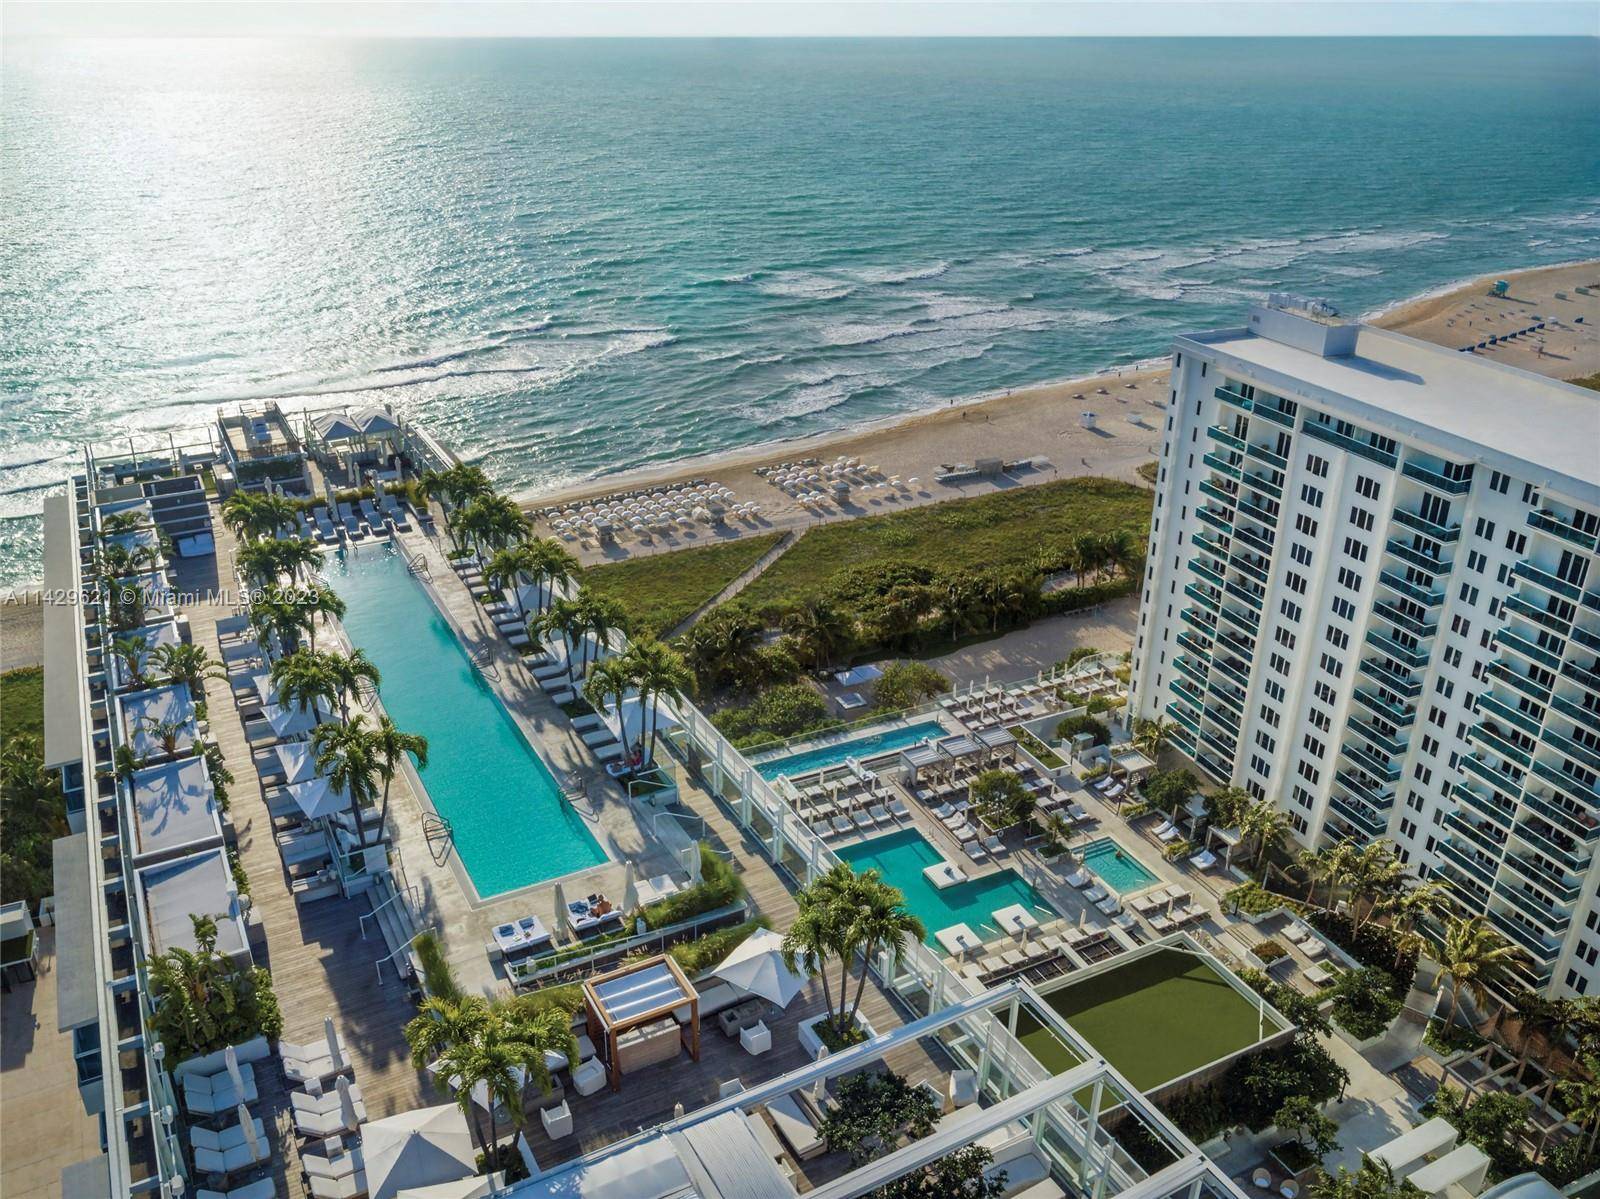 This upscale beachfront hotel is a minute from Collins Avenue bus stop, a mile from the bustling Lincoln Road and 1.